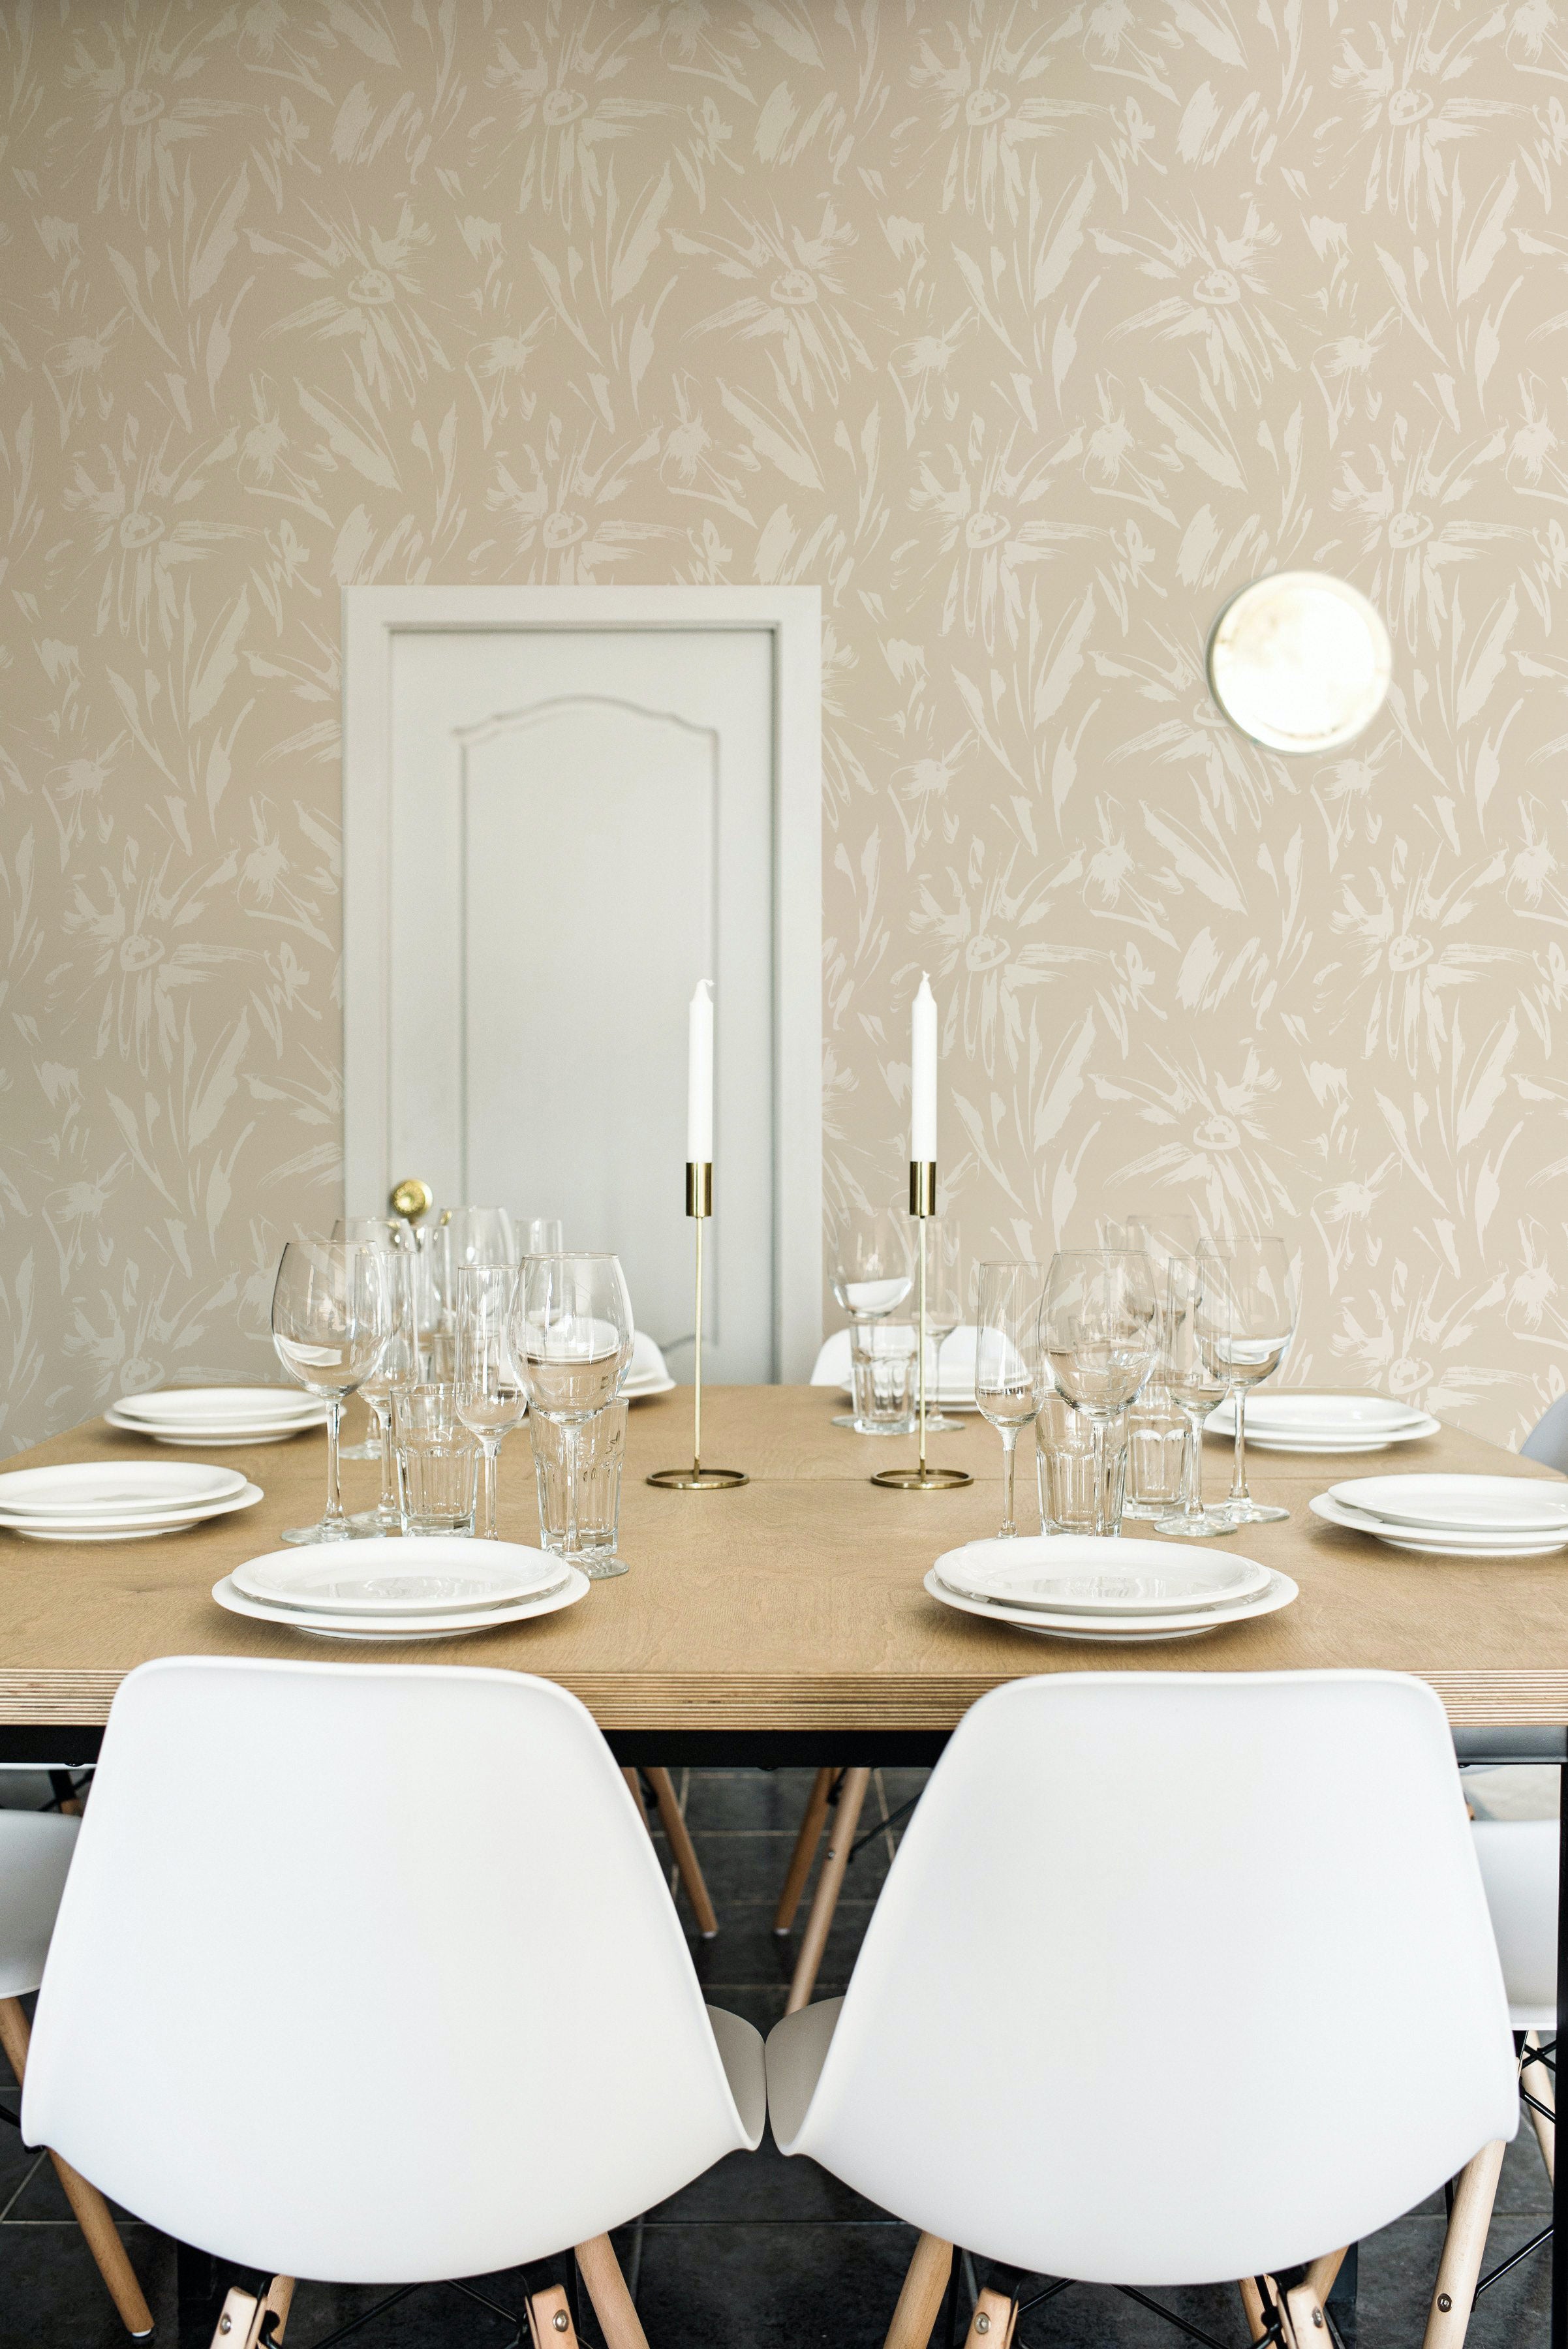 A modern dining room featuring the Ecru Floral Sketch Wallpaper - 25". The wallpaper, with its subtle beige floral sketches on an ecru background, adds an understated elegance to the space, complemented by the simple white chairs, wooden table, and minimalist decor.